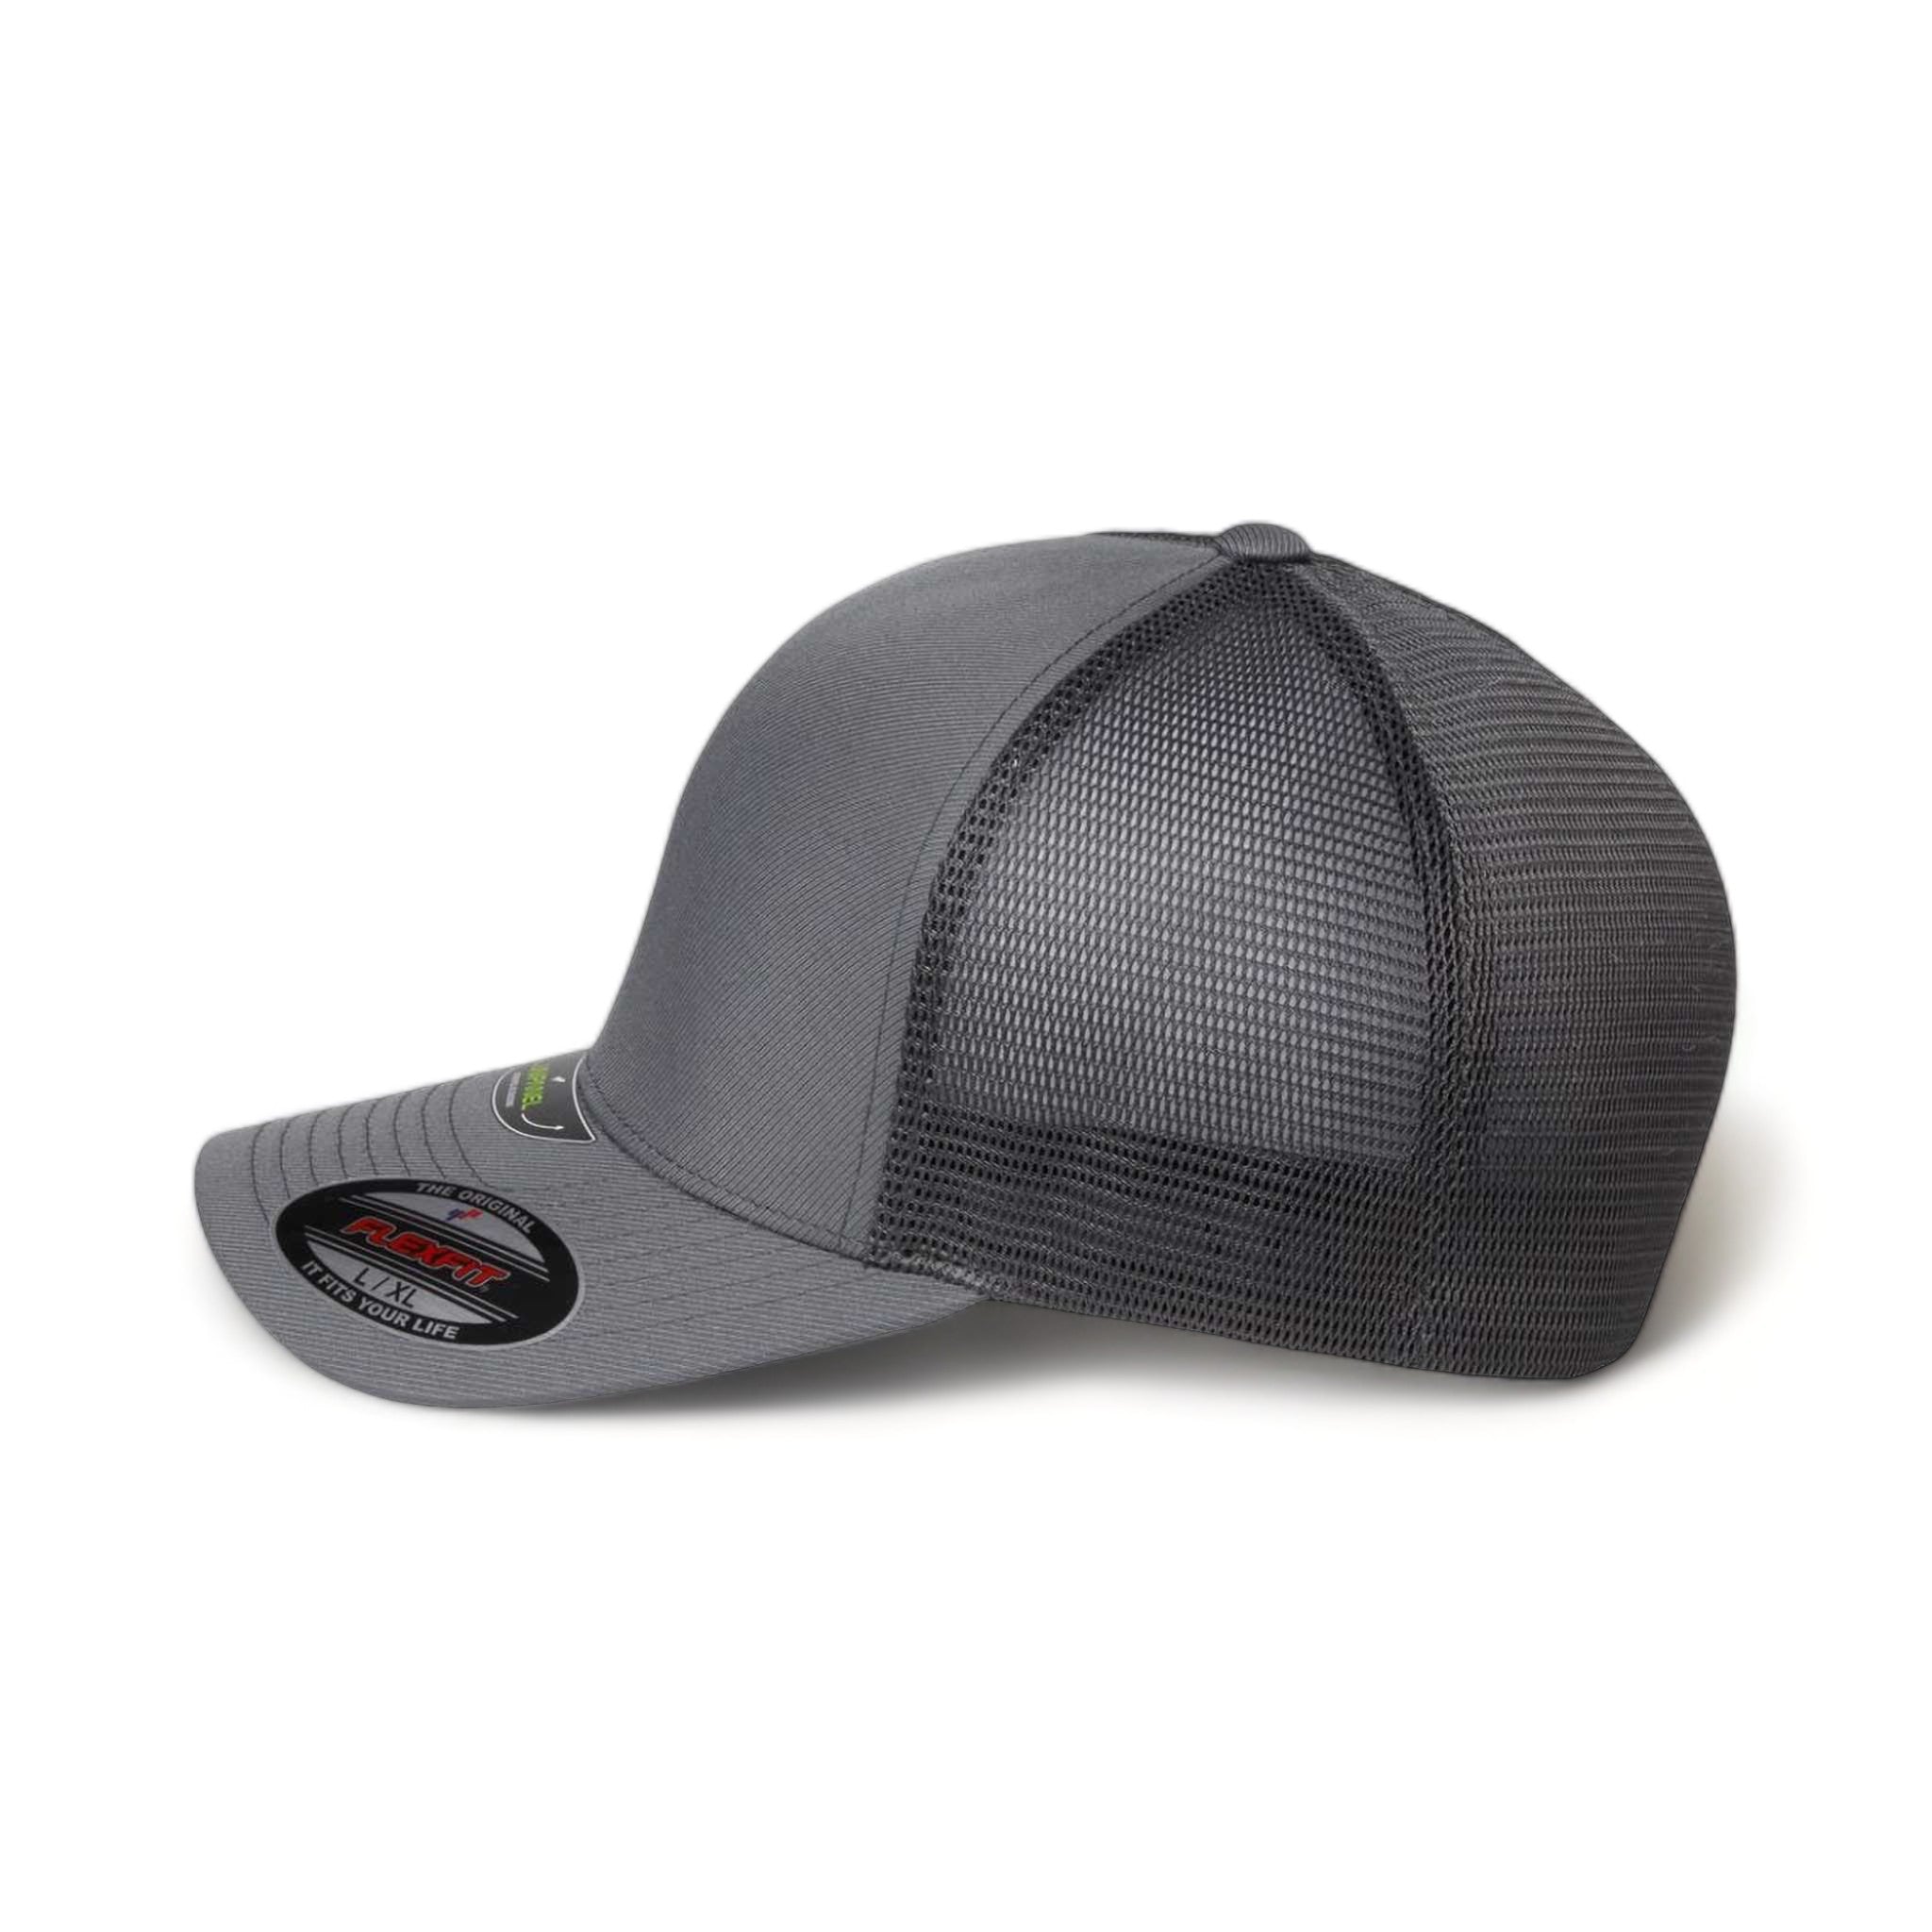 Side view of Flexfit 5511UP custom hat in charcoal